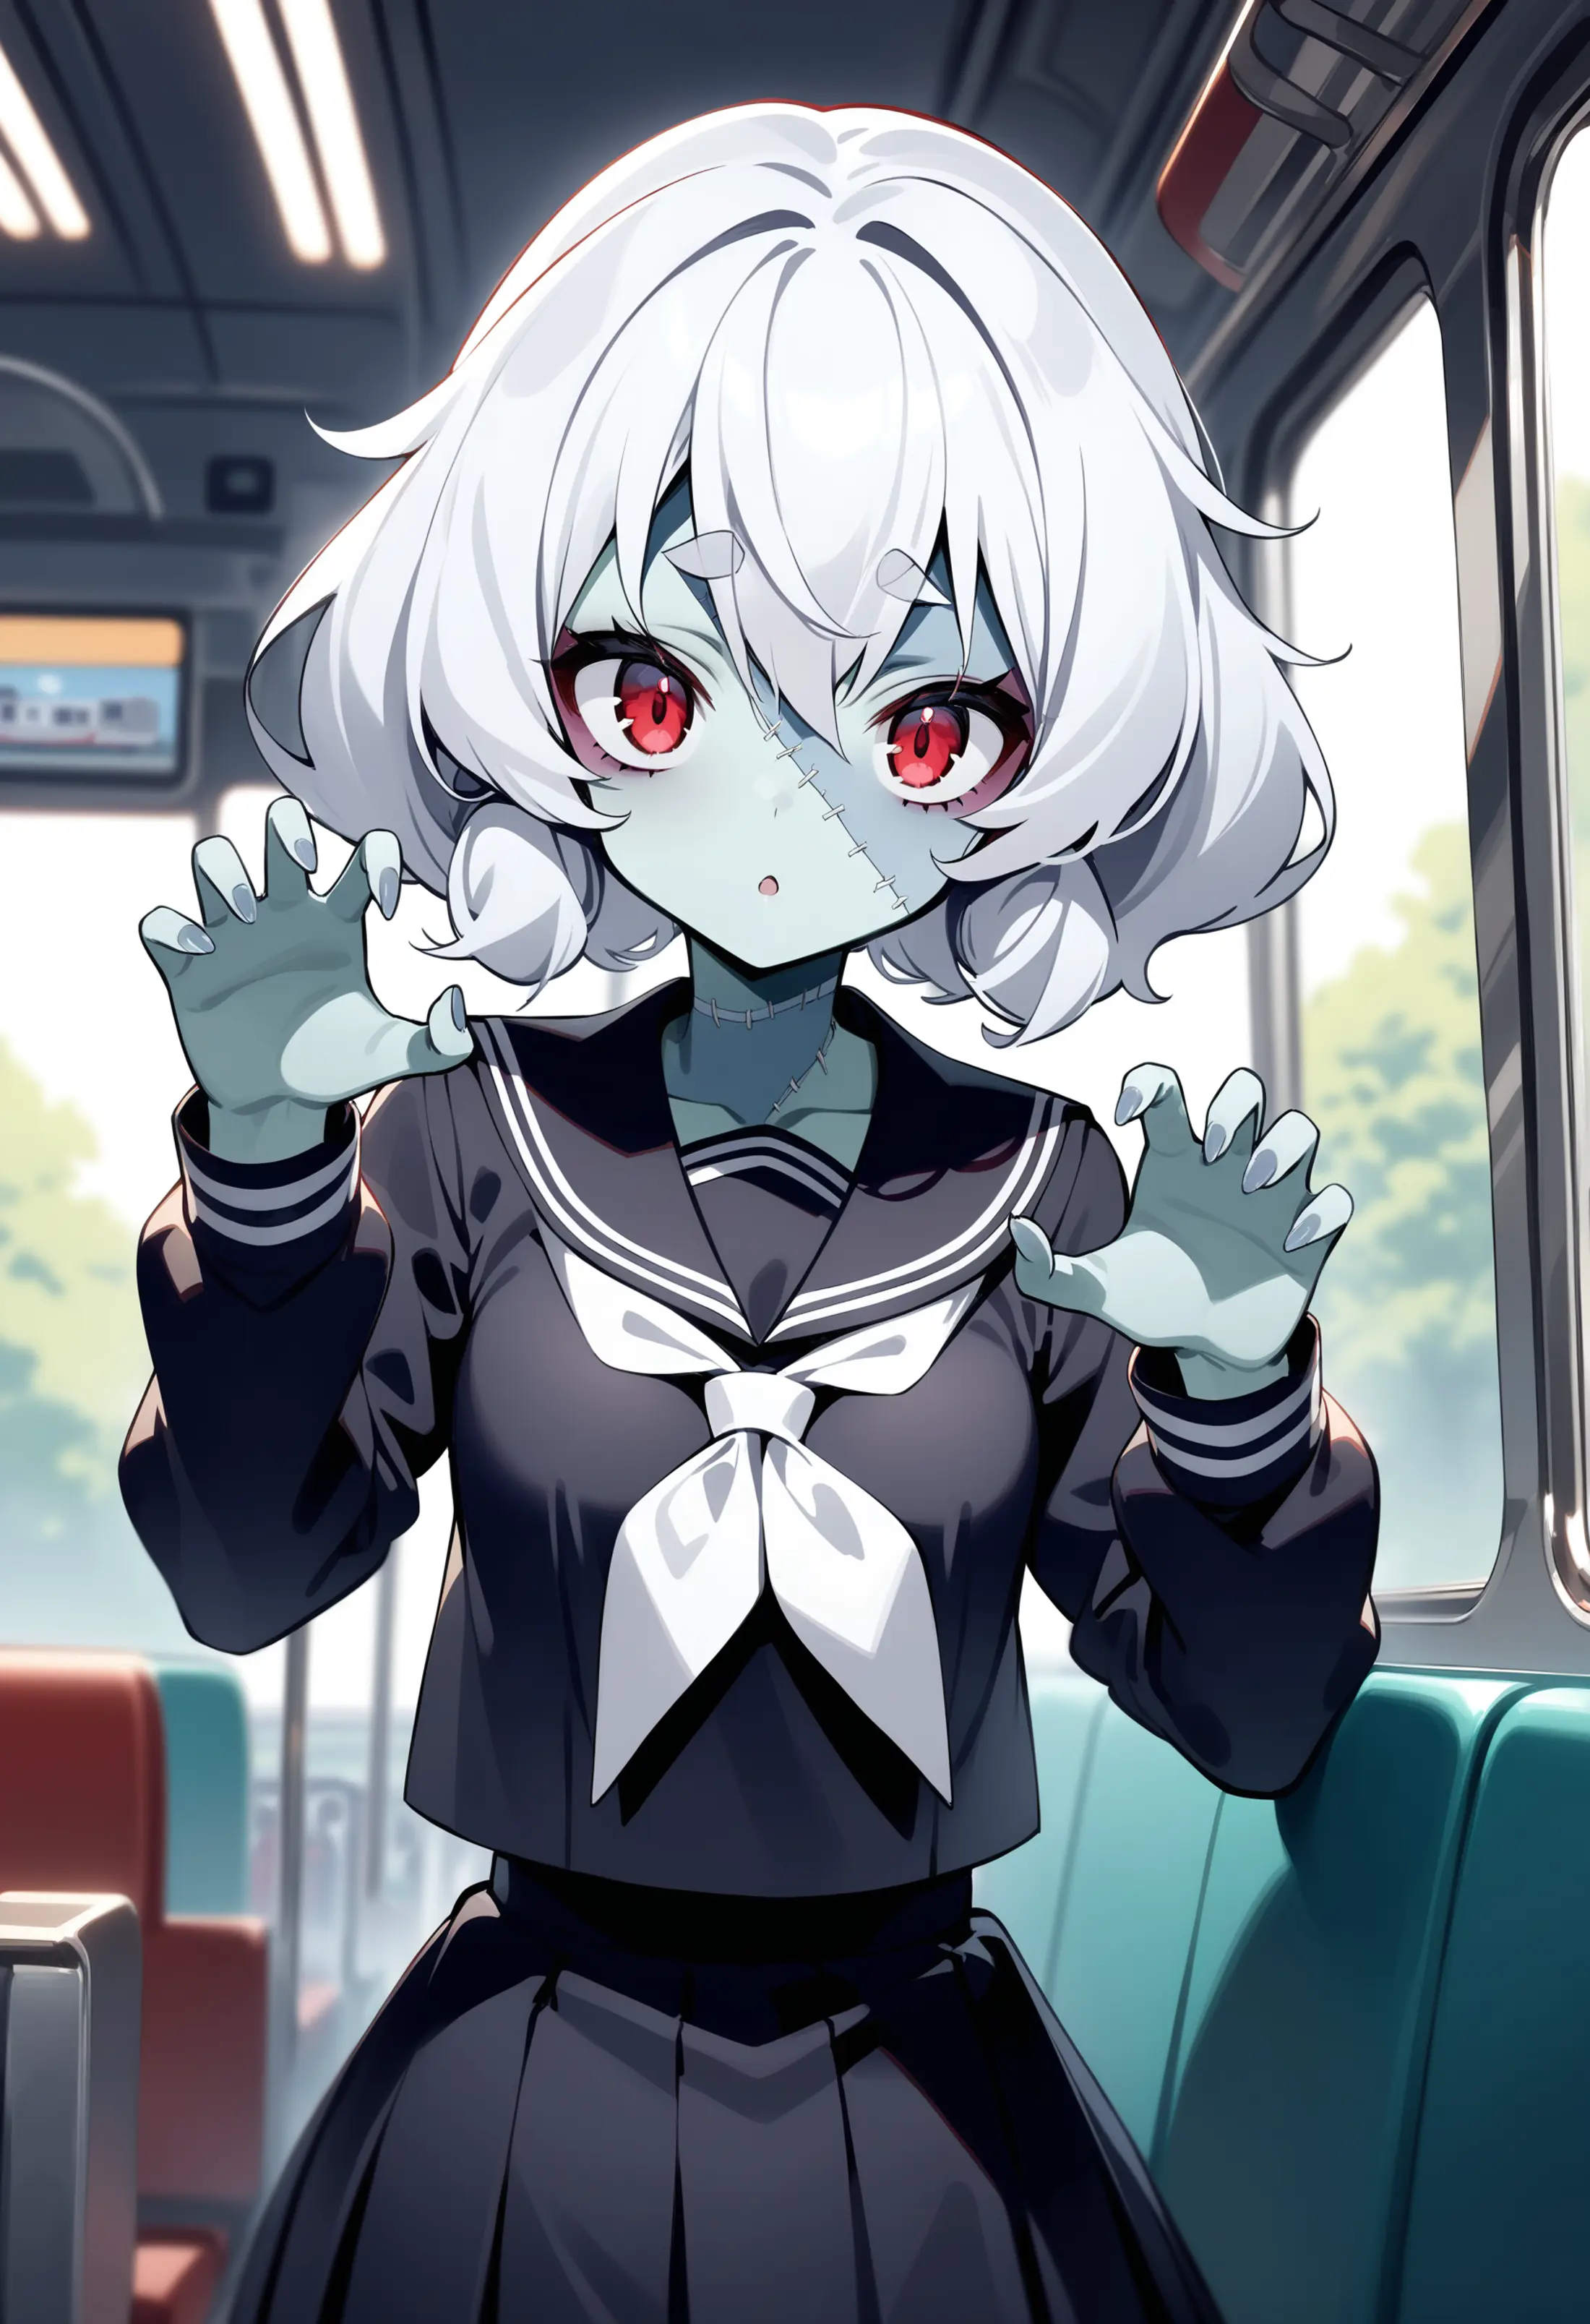 A young woman with short white hair and red eyes, dressed in a dark school uniform with a light neck tie. She is standing inside a bus, holding her hands up in a menacing way. Her skin complexion is a pale blue, like that of a zombie's, with stitches running down the center of her face. 